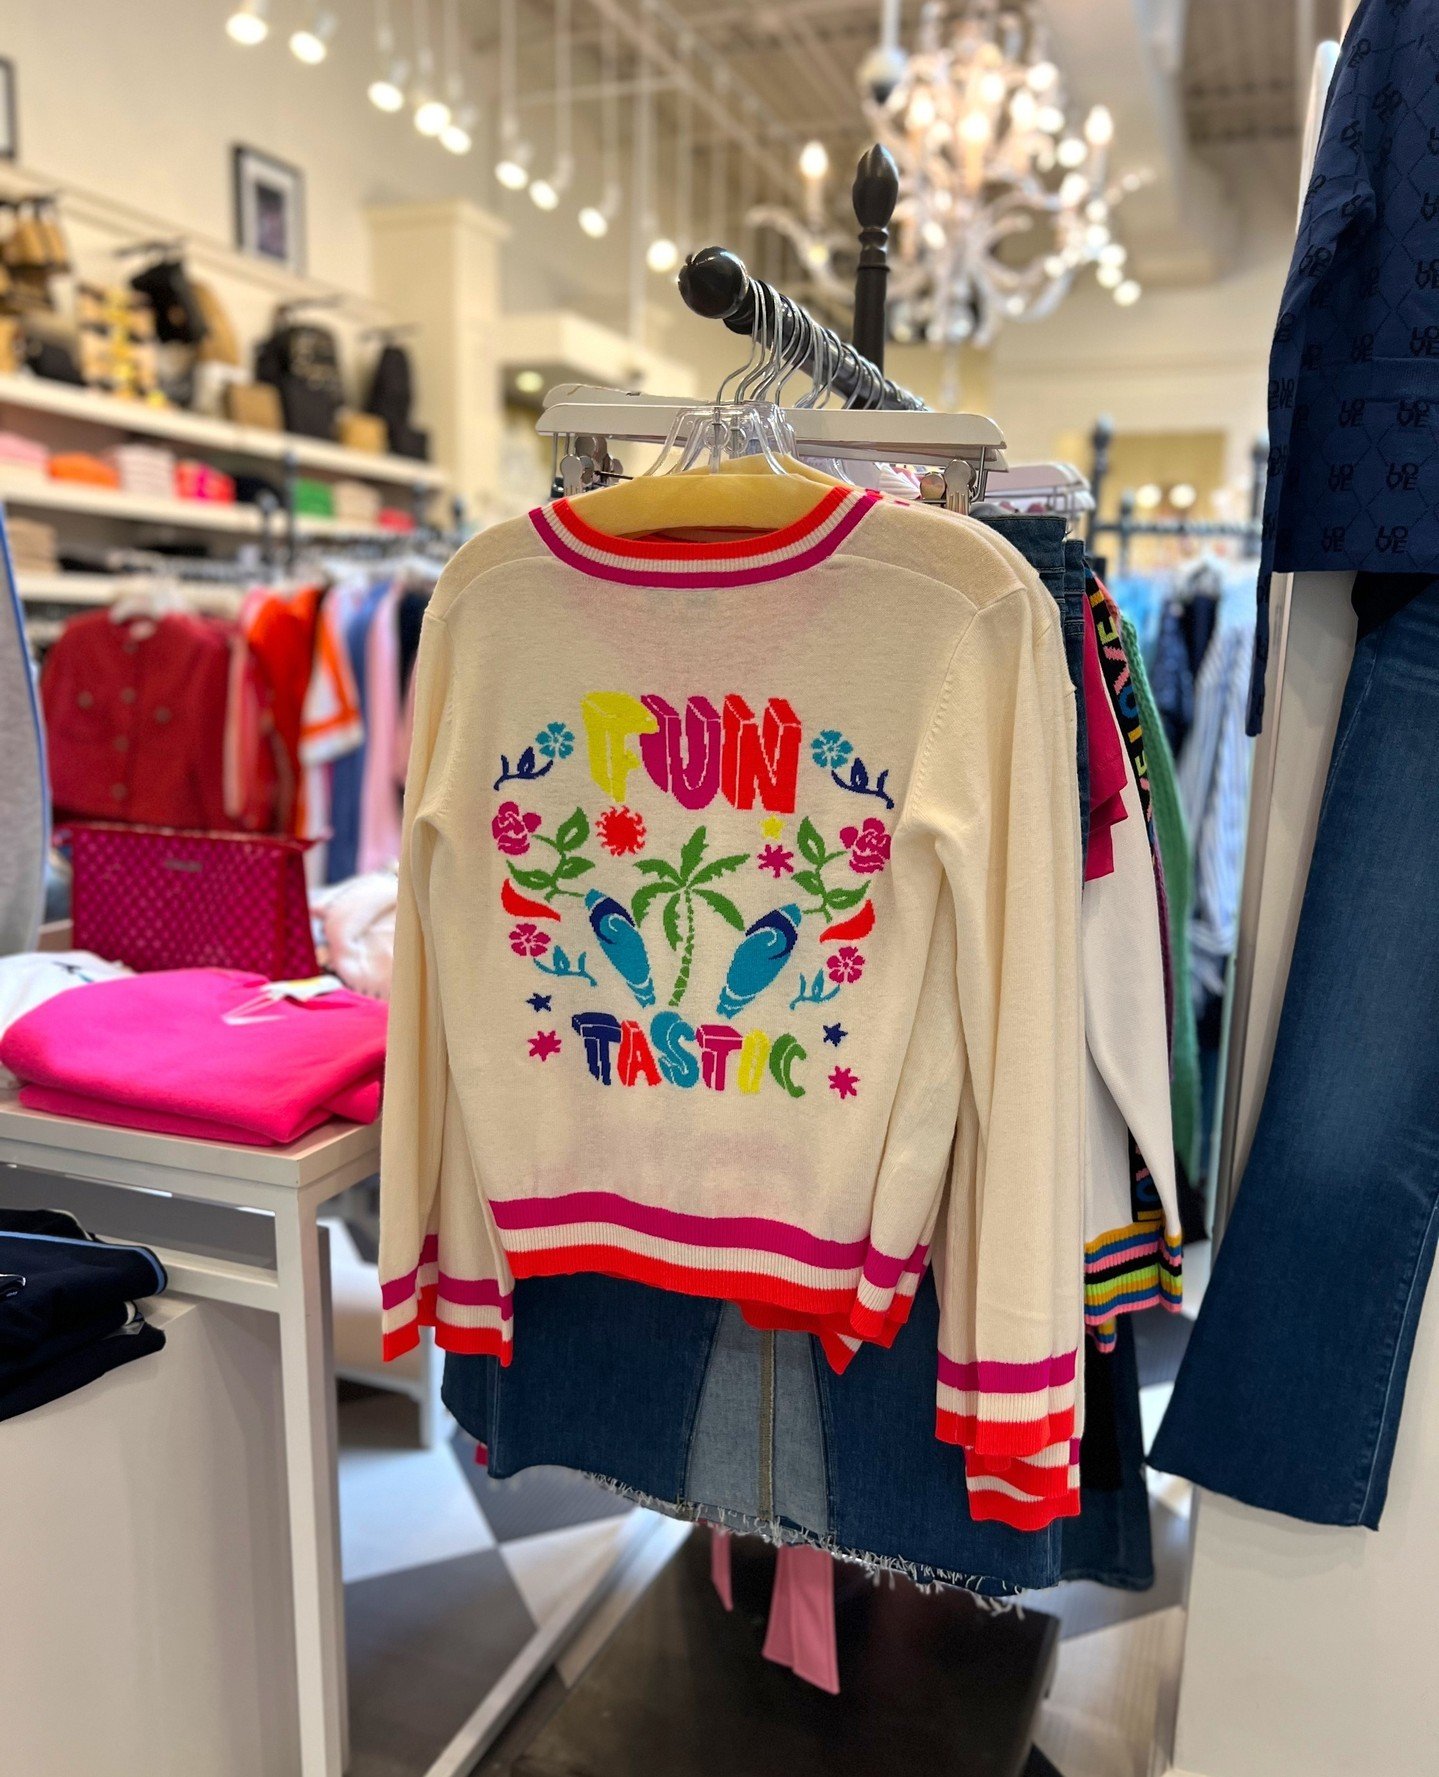 A statement sweater that speaks for itself. 🌺 Find this fun-tastic floral knit and other spring style discoveries at @mellyedina.